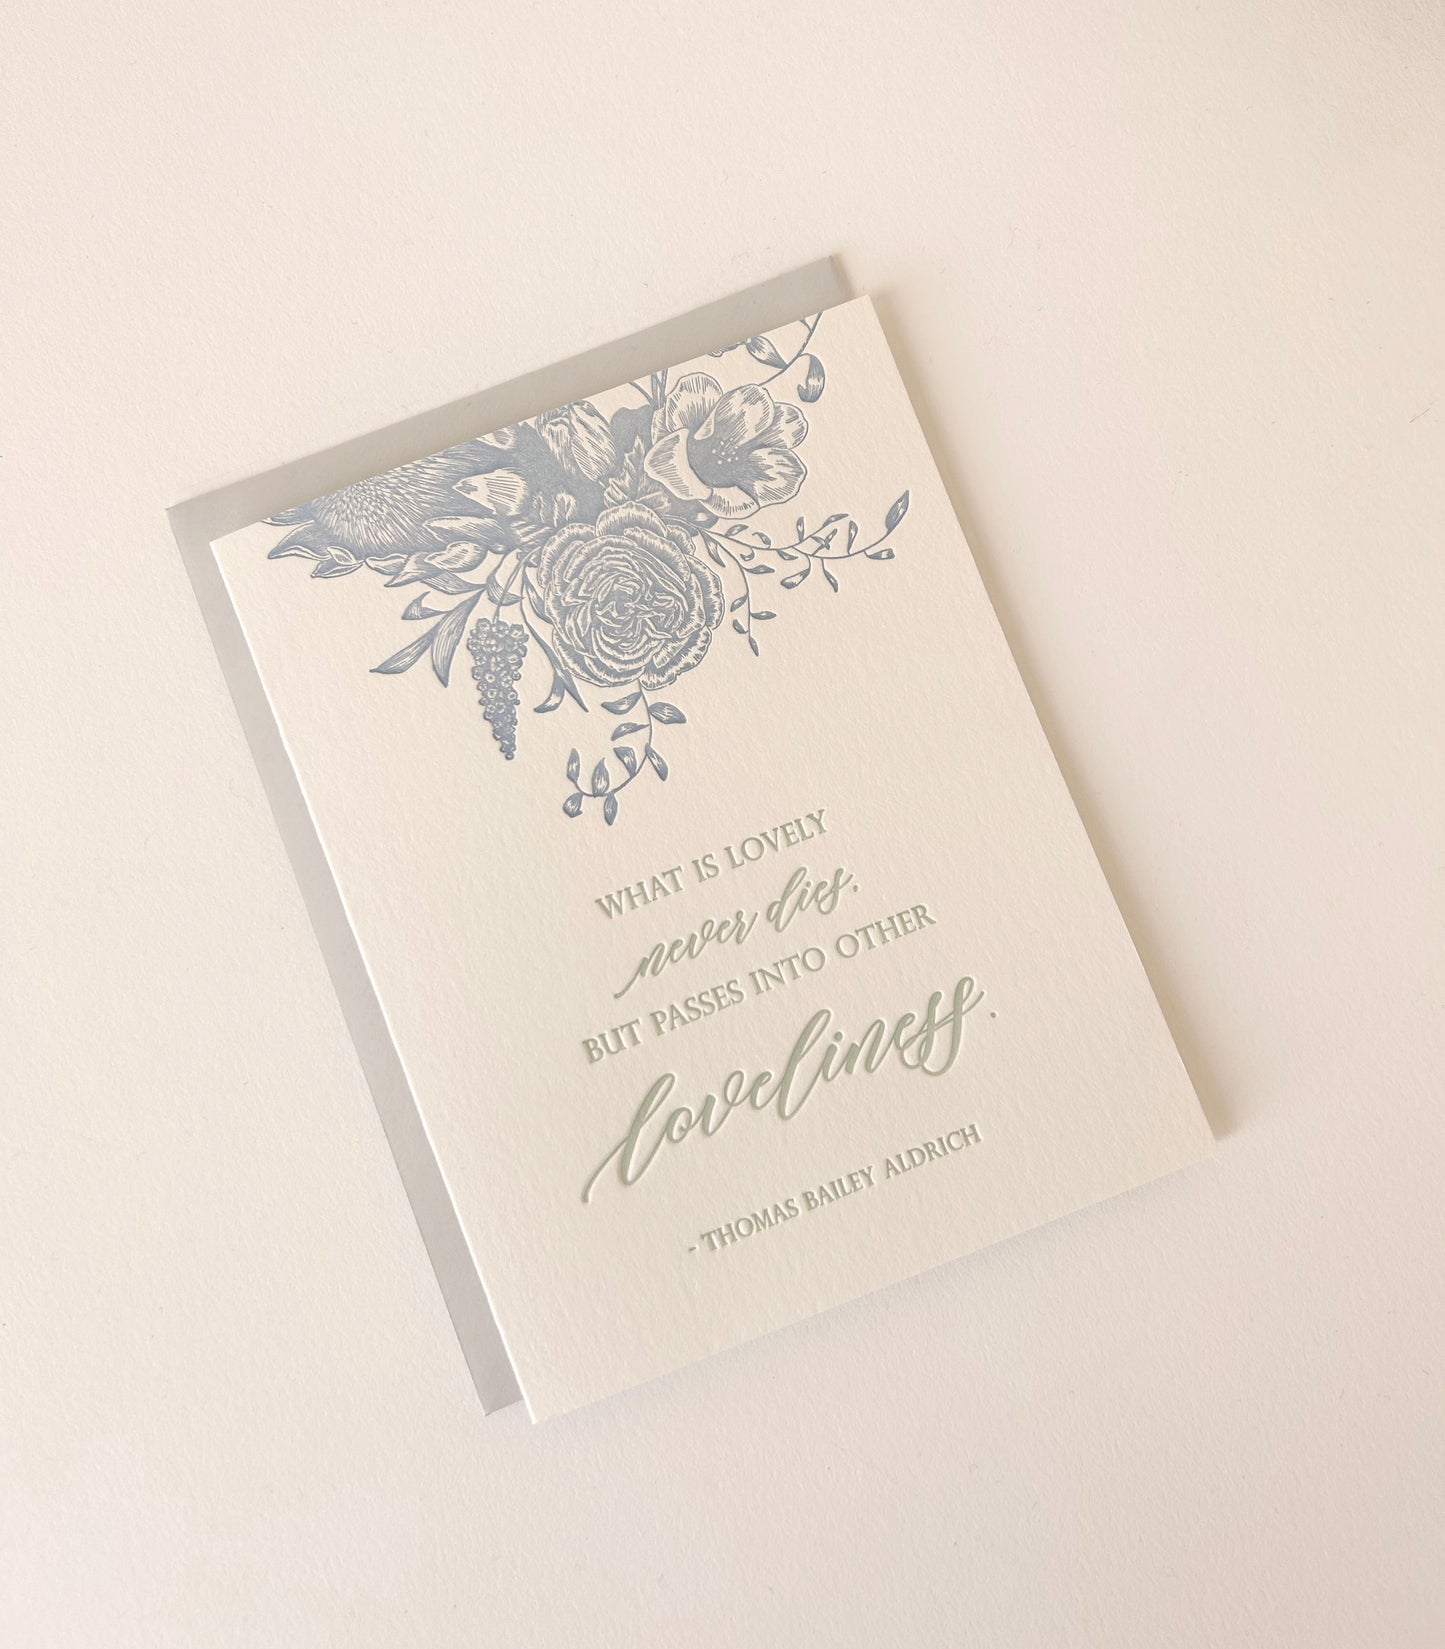 Letterpress sympathy card with florals that says "What is lovely never dies, but passes into other loveliness. - Thomas Bailey Aldrich" by Rust Belt Love